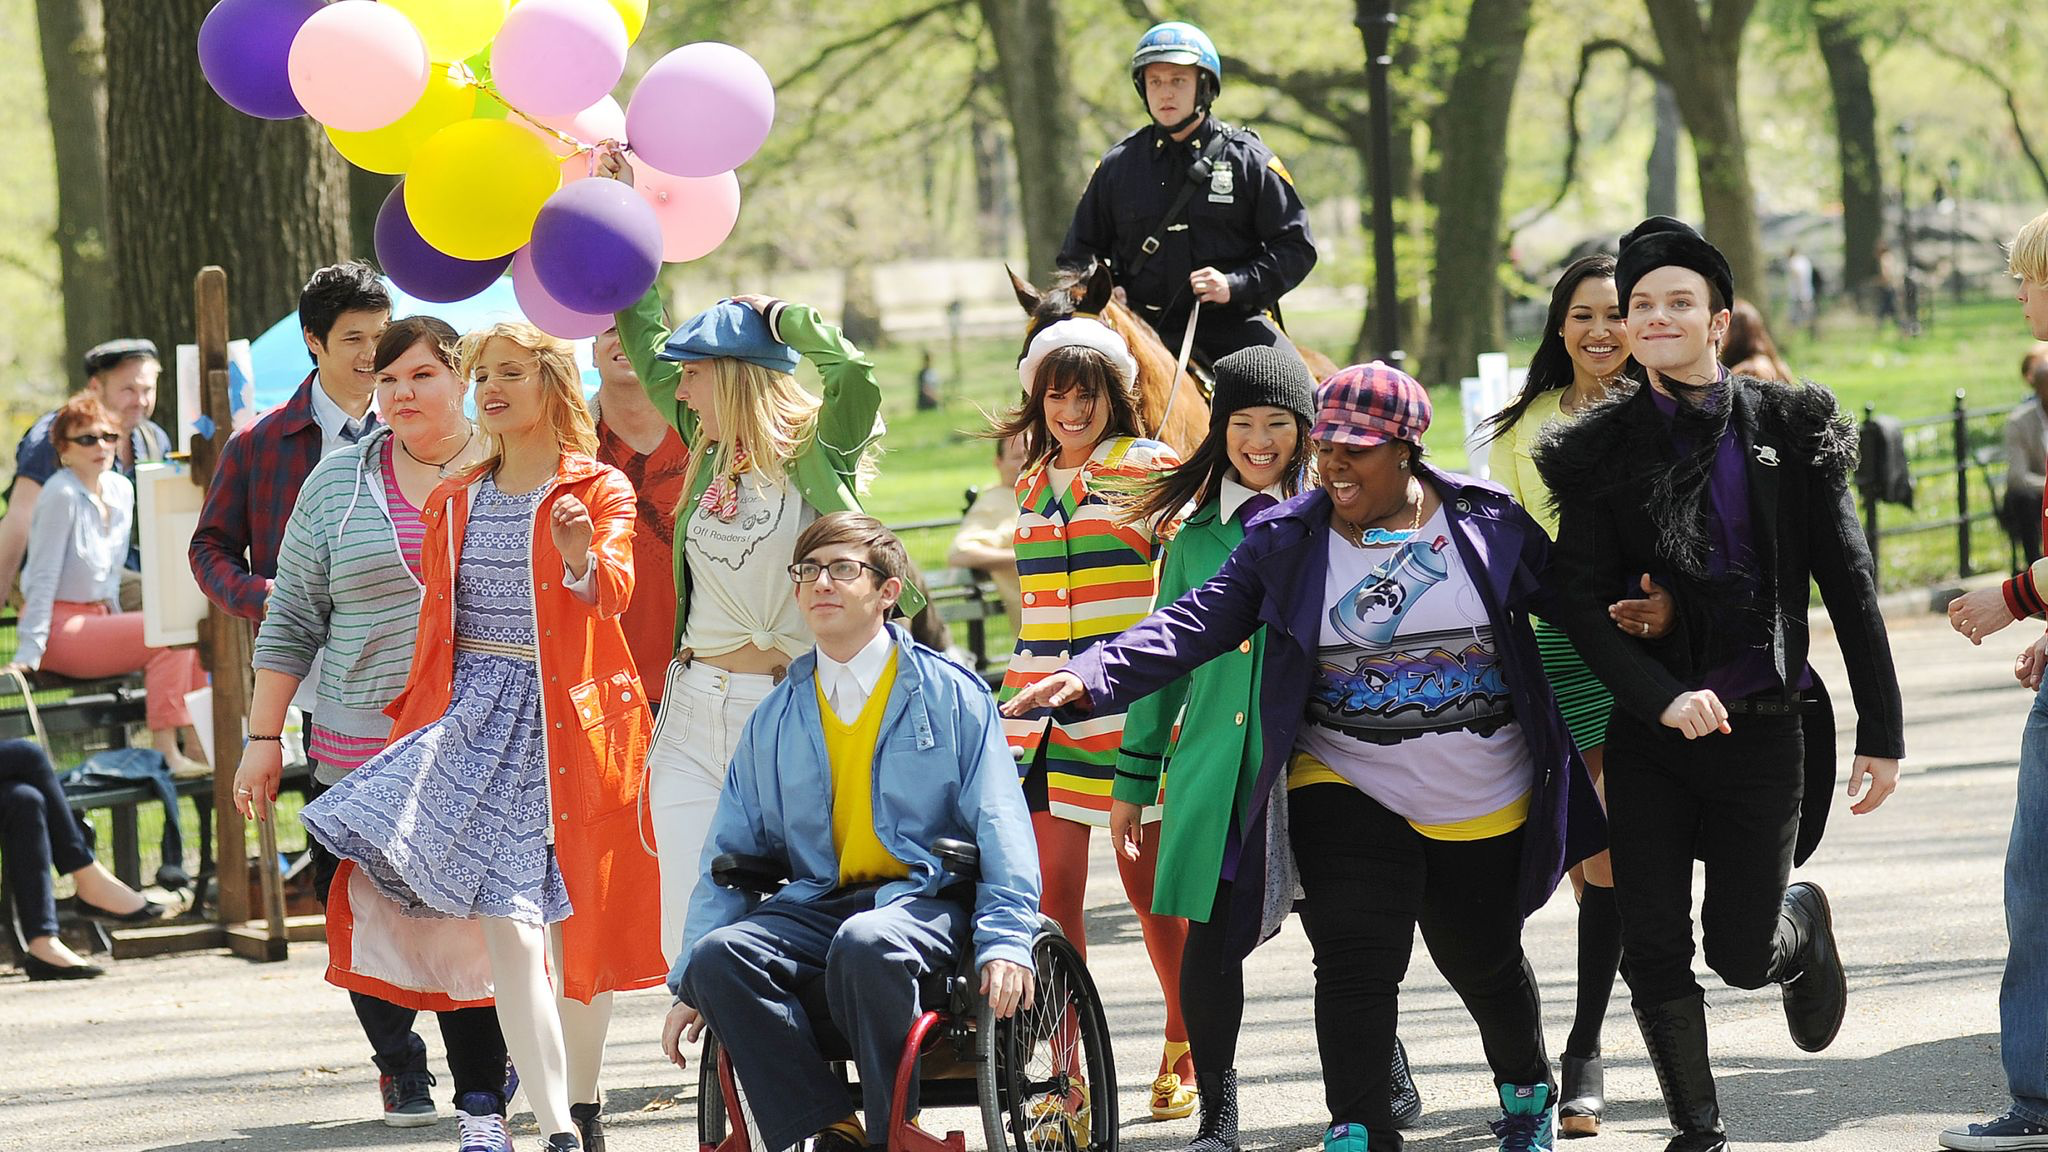 The Cast of "Glee" Reunites to Talk About Naya Rivera's Impact